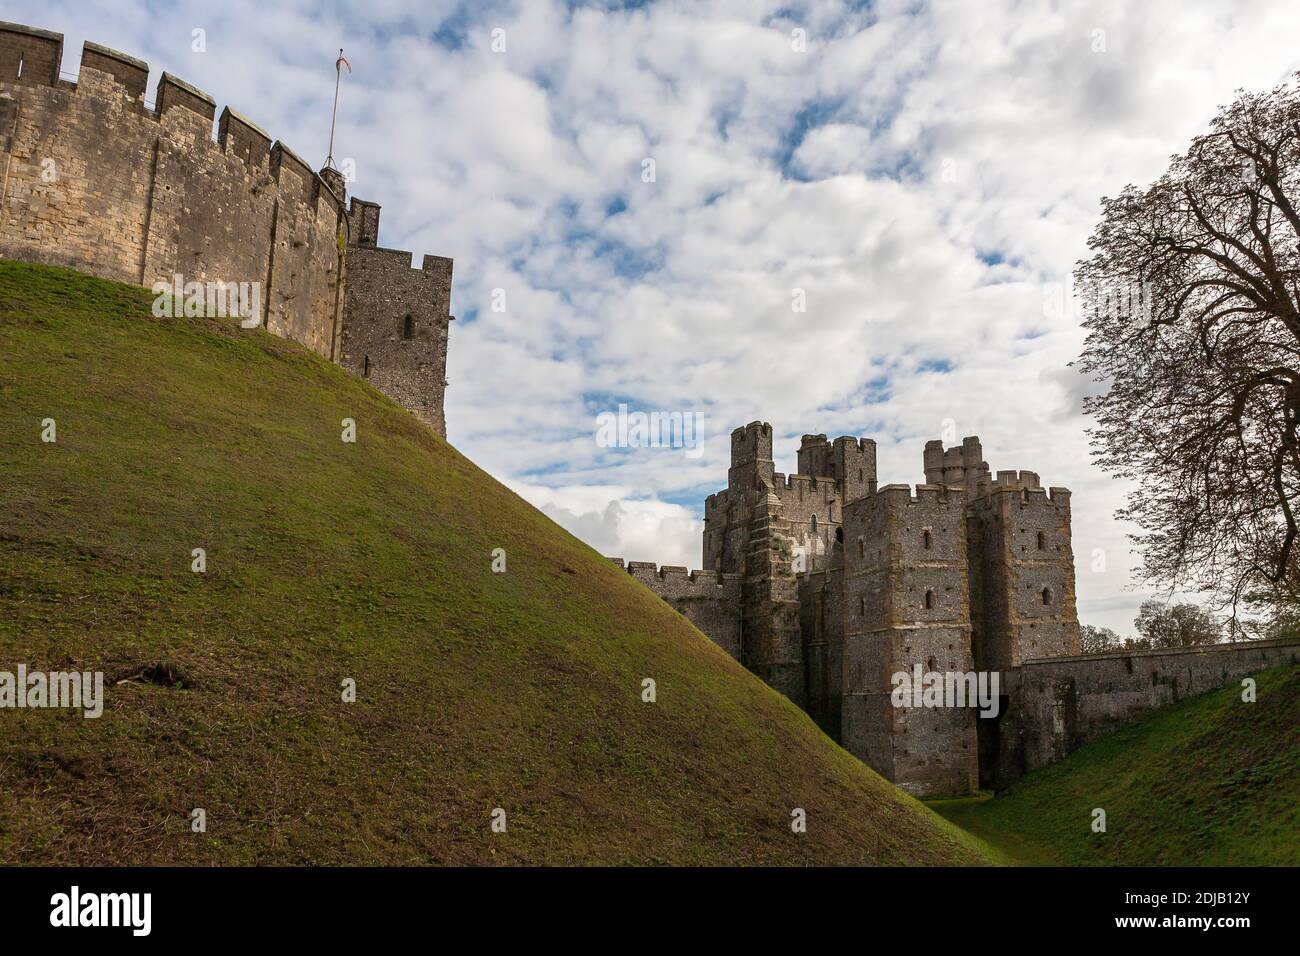 Original Norman motte or mound, surmounted by the 12th century keep, with the 14th century Gatehouse and Barbican beyond, Arundel Castle, West Sussex Stock Photo